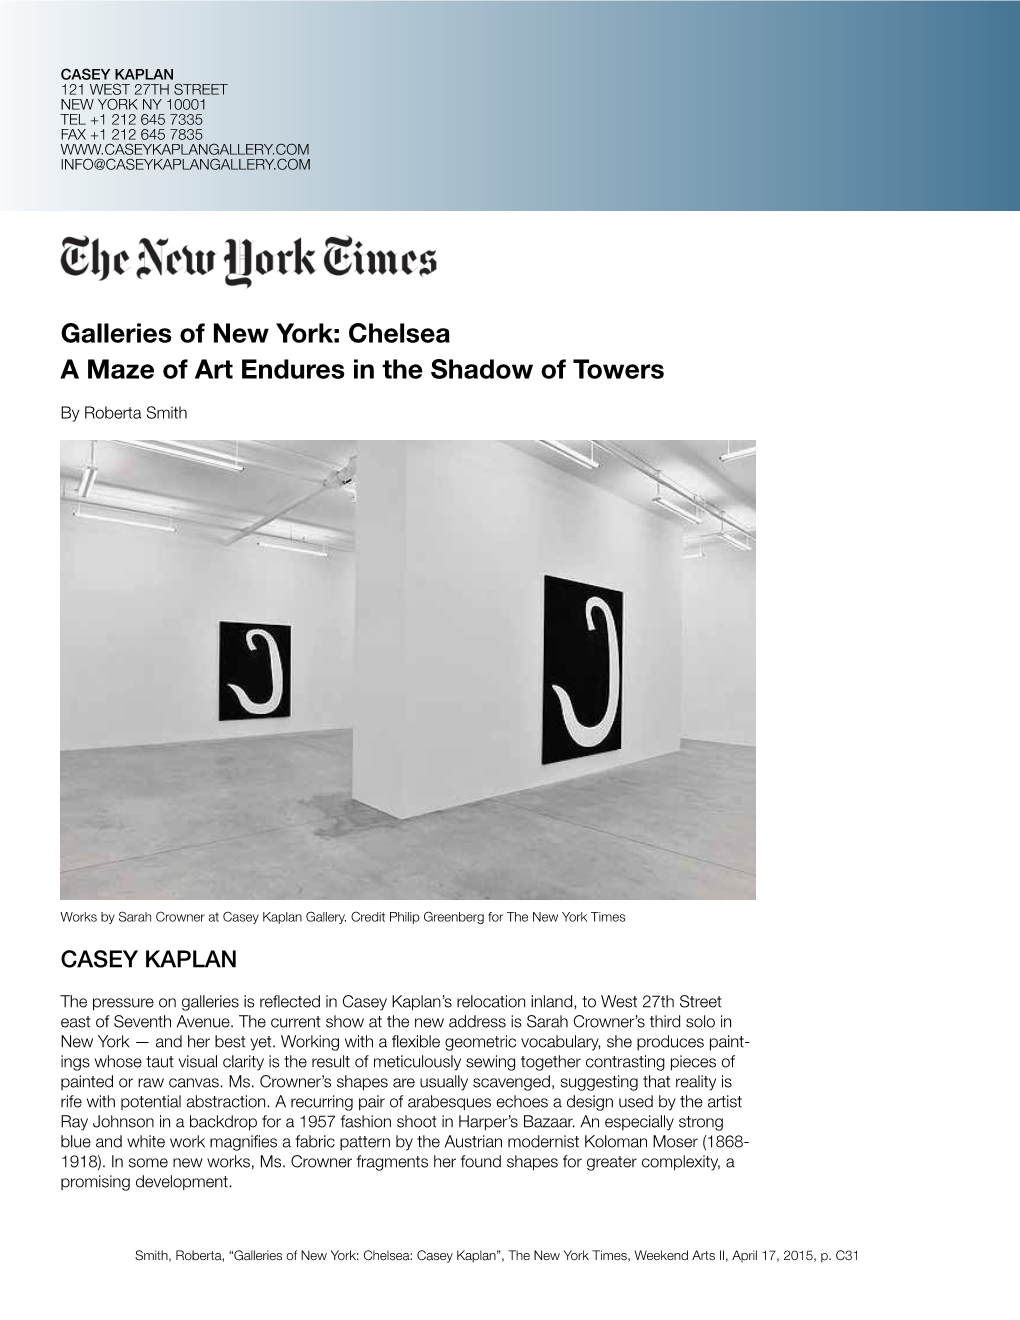 Galleries of New York: Chelsea a Maze of Art Endures in the Shadow of Towers by Roberta Smith